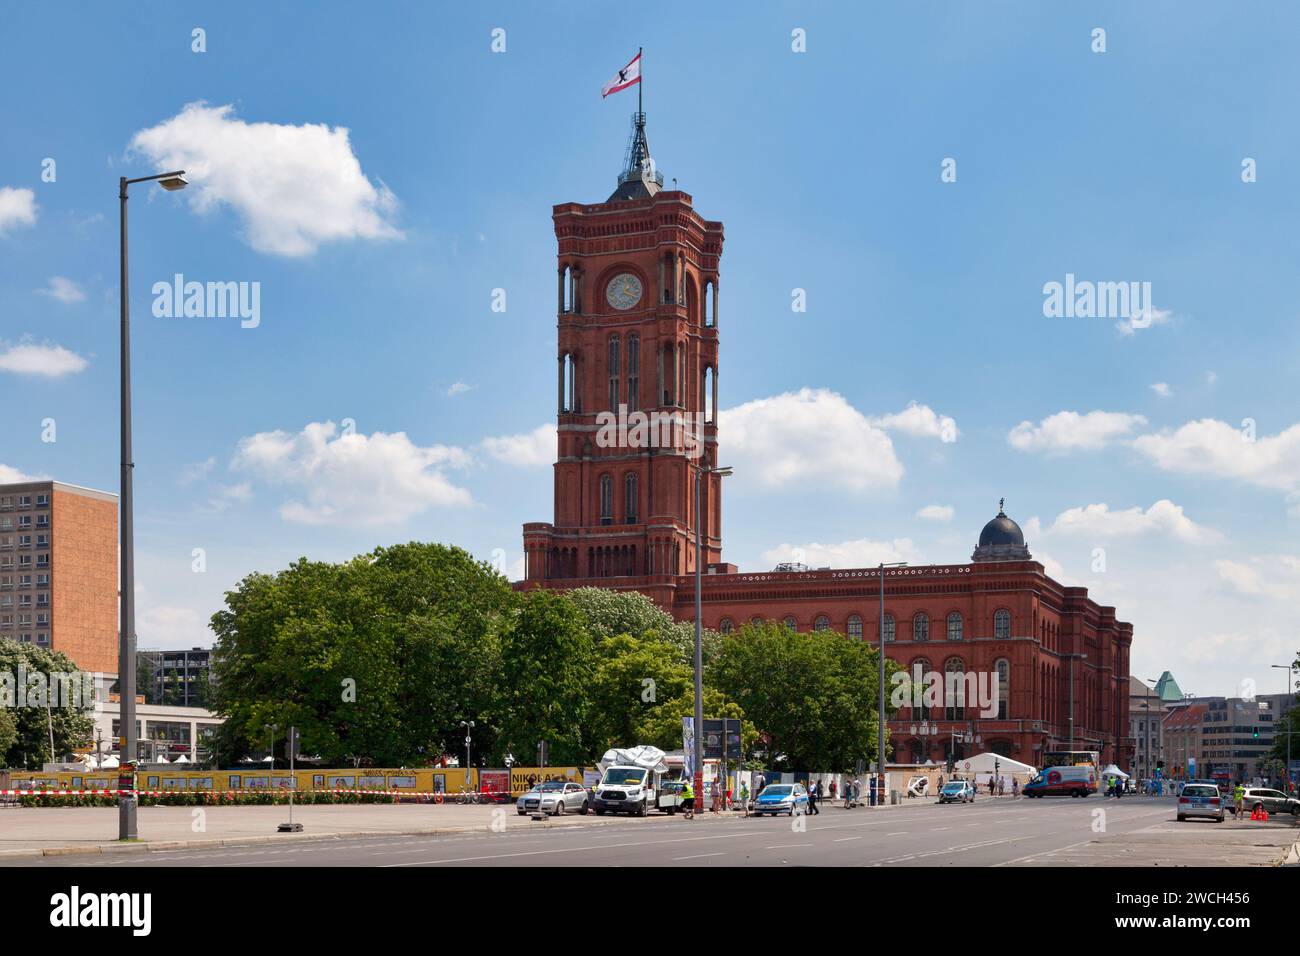 Berlin, Germany - June 01 2019: The Rotes Rathaus (Red City Hall) is the town hall of Berlin, located in the Mitte district. It is the home to the gov Stock Photo